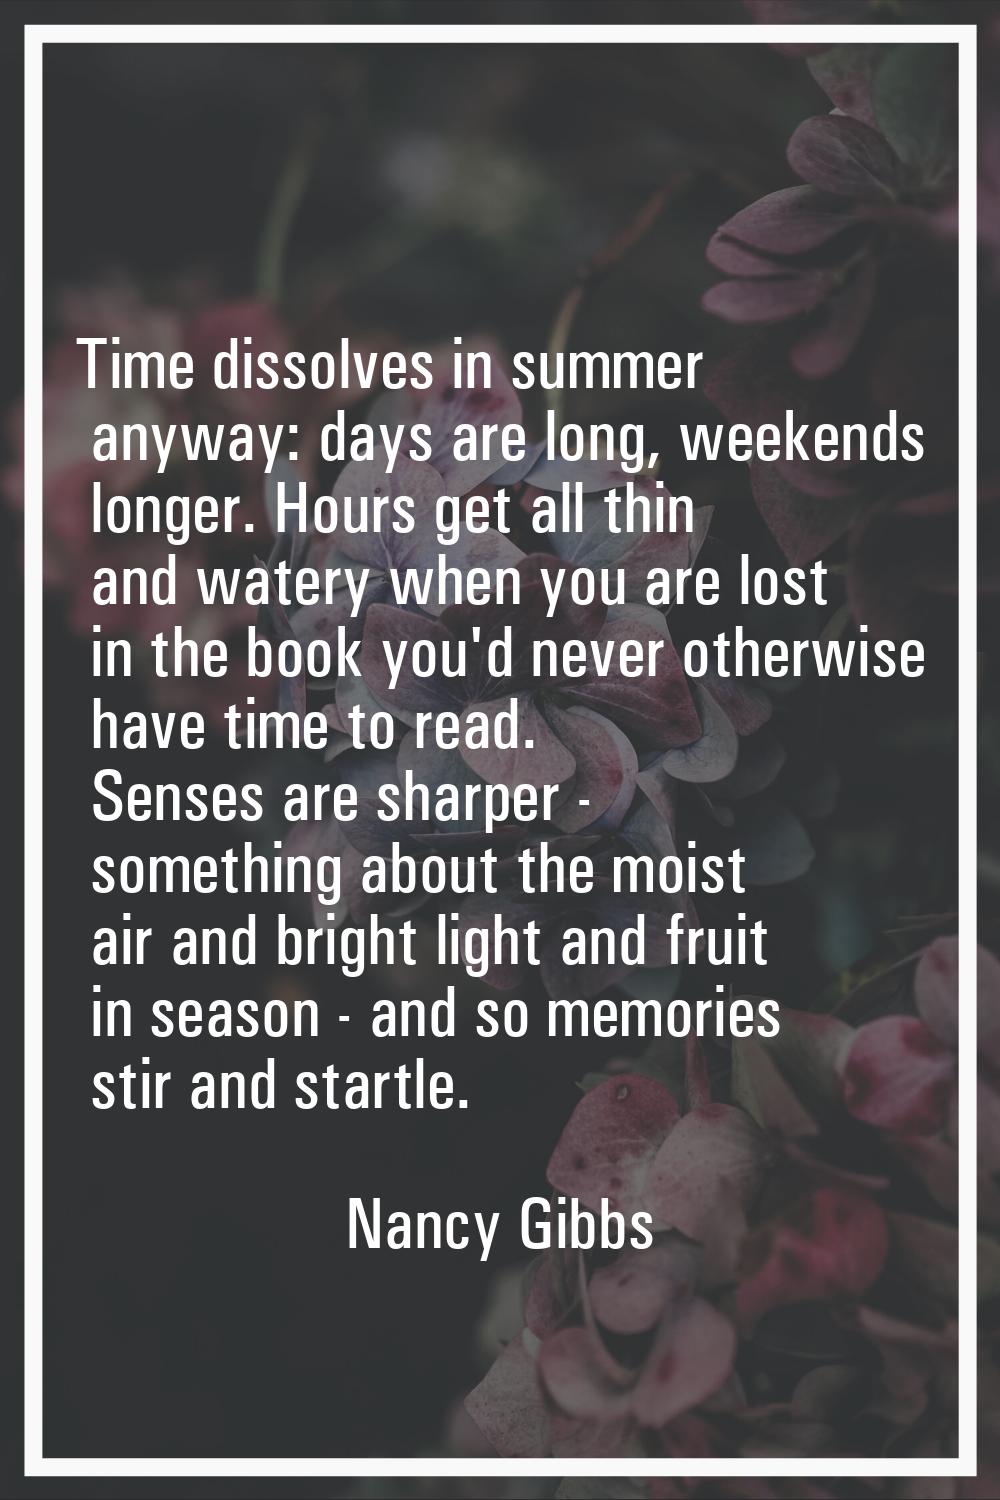 Time dissolves in summer anyway: days are long, weekends longer. Hours get all thin and watery when